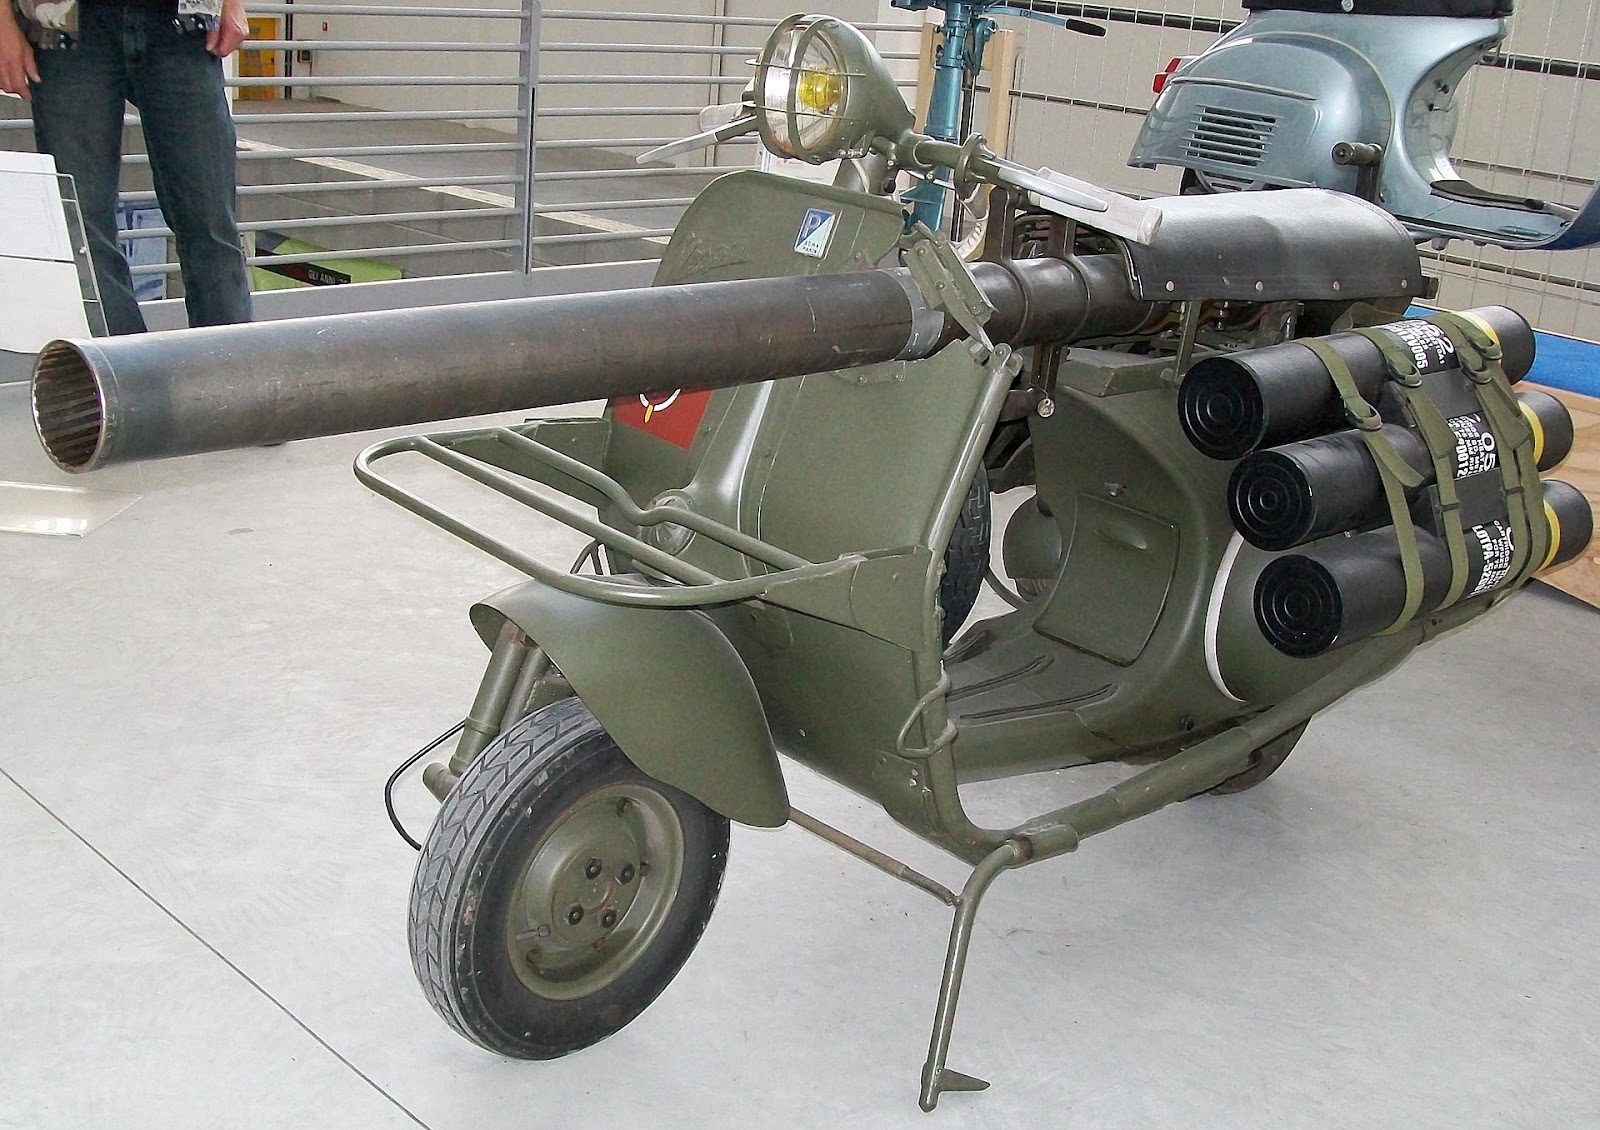 The Vespa 150 TAP, used to maneuver quickly and fire long-range bullets during the 1950s. Image via Wikimedia Commons.